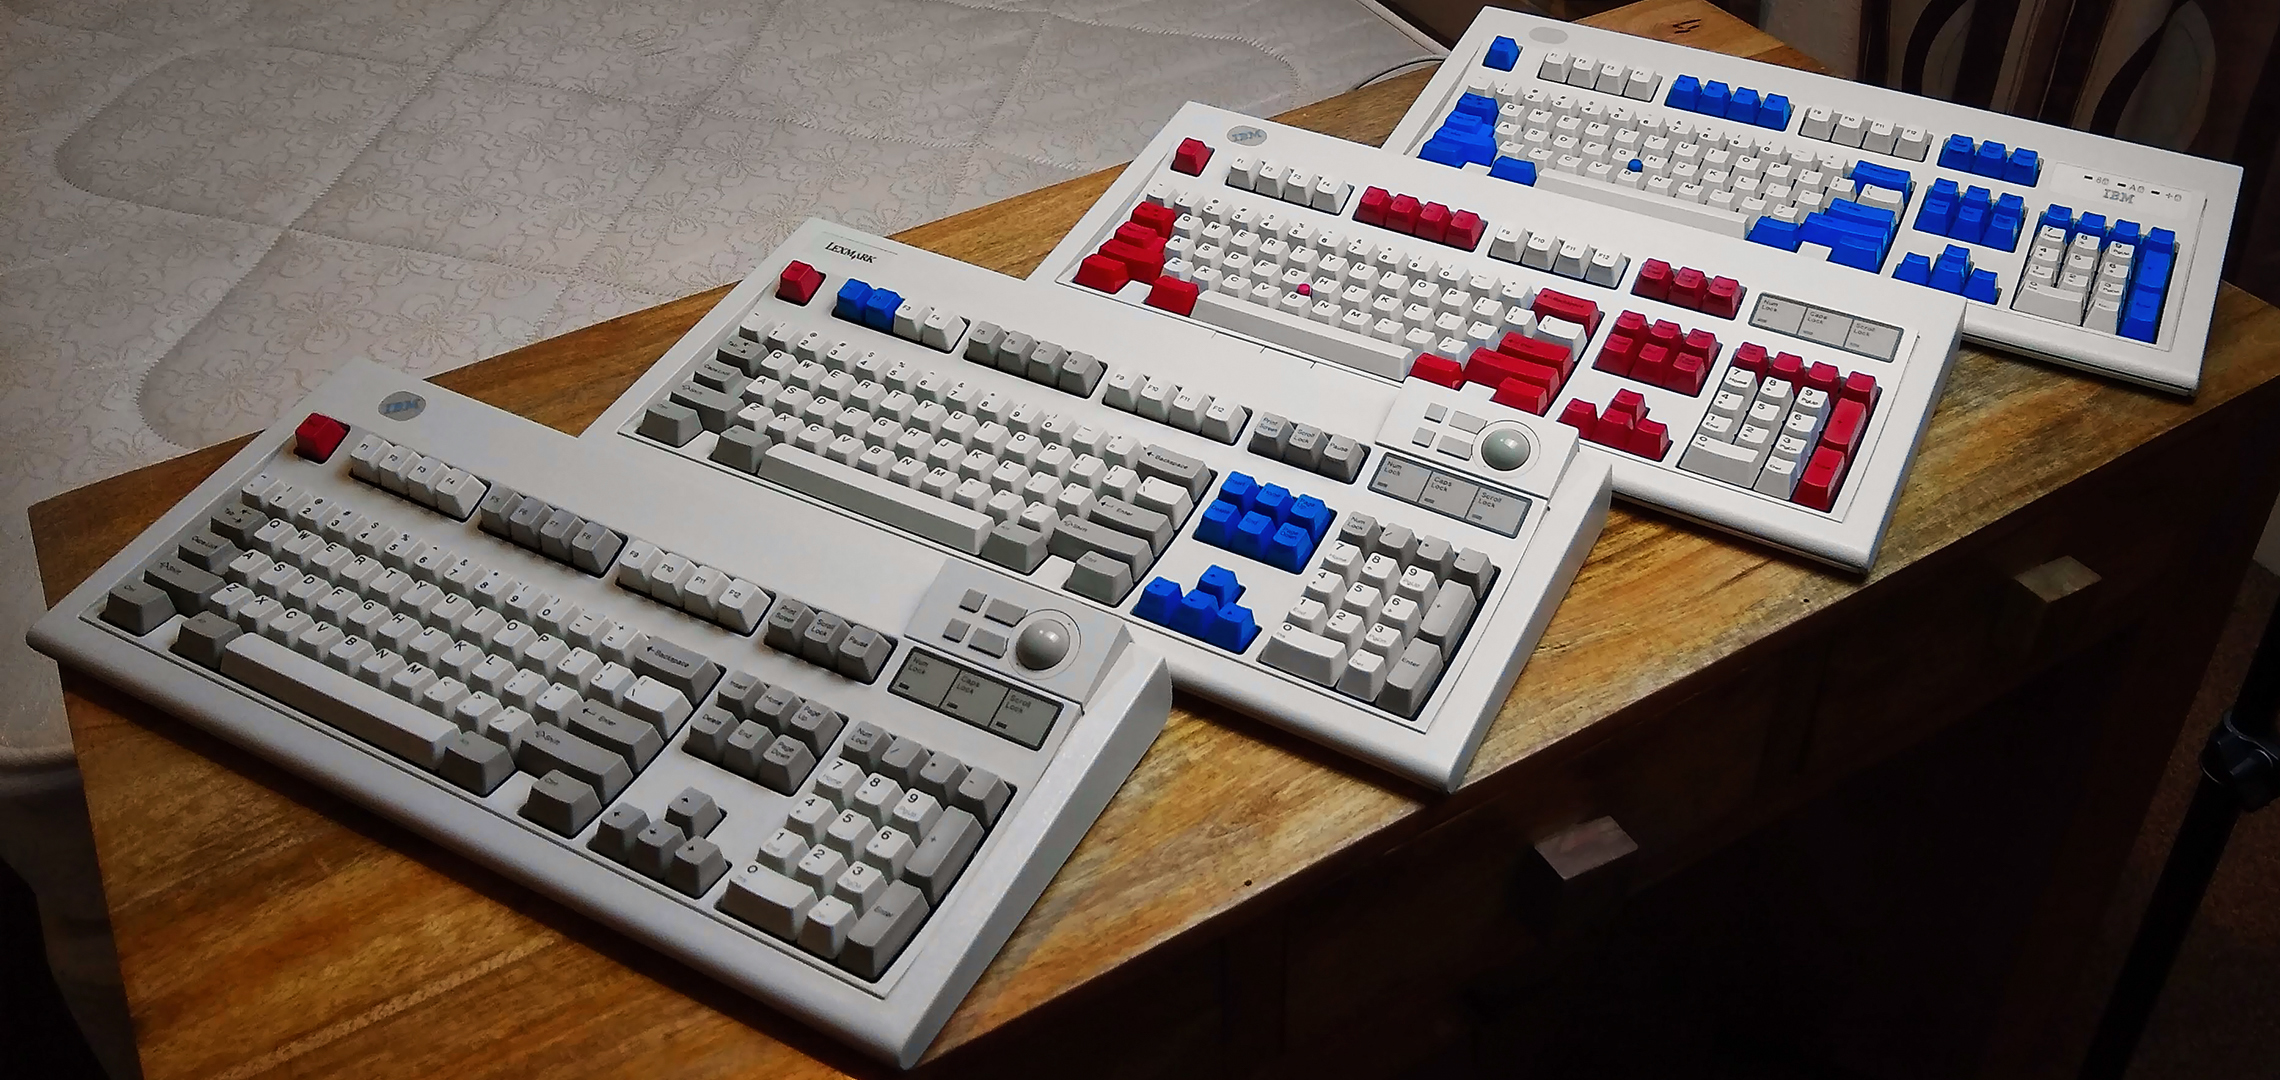 Various Model M keyboards<a class='source-link' href='/wiki?id=modelm#Sources'><sup>[ASK]</sup></a>